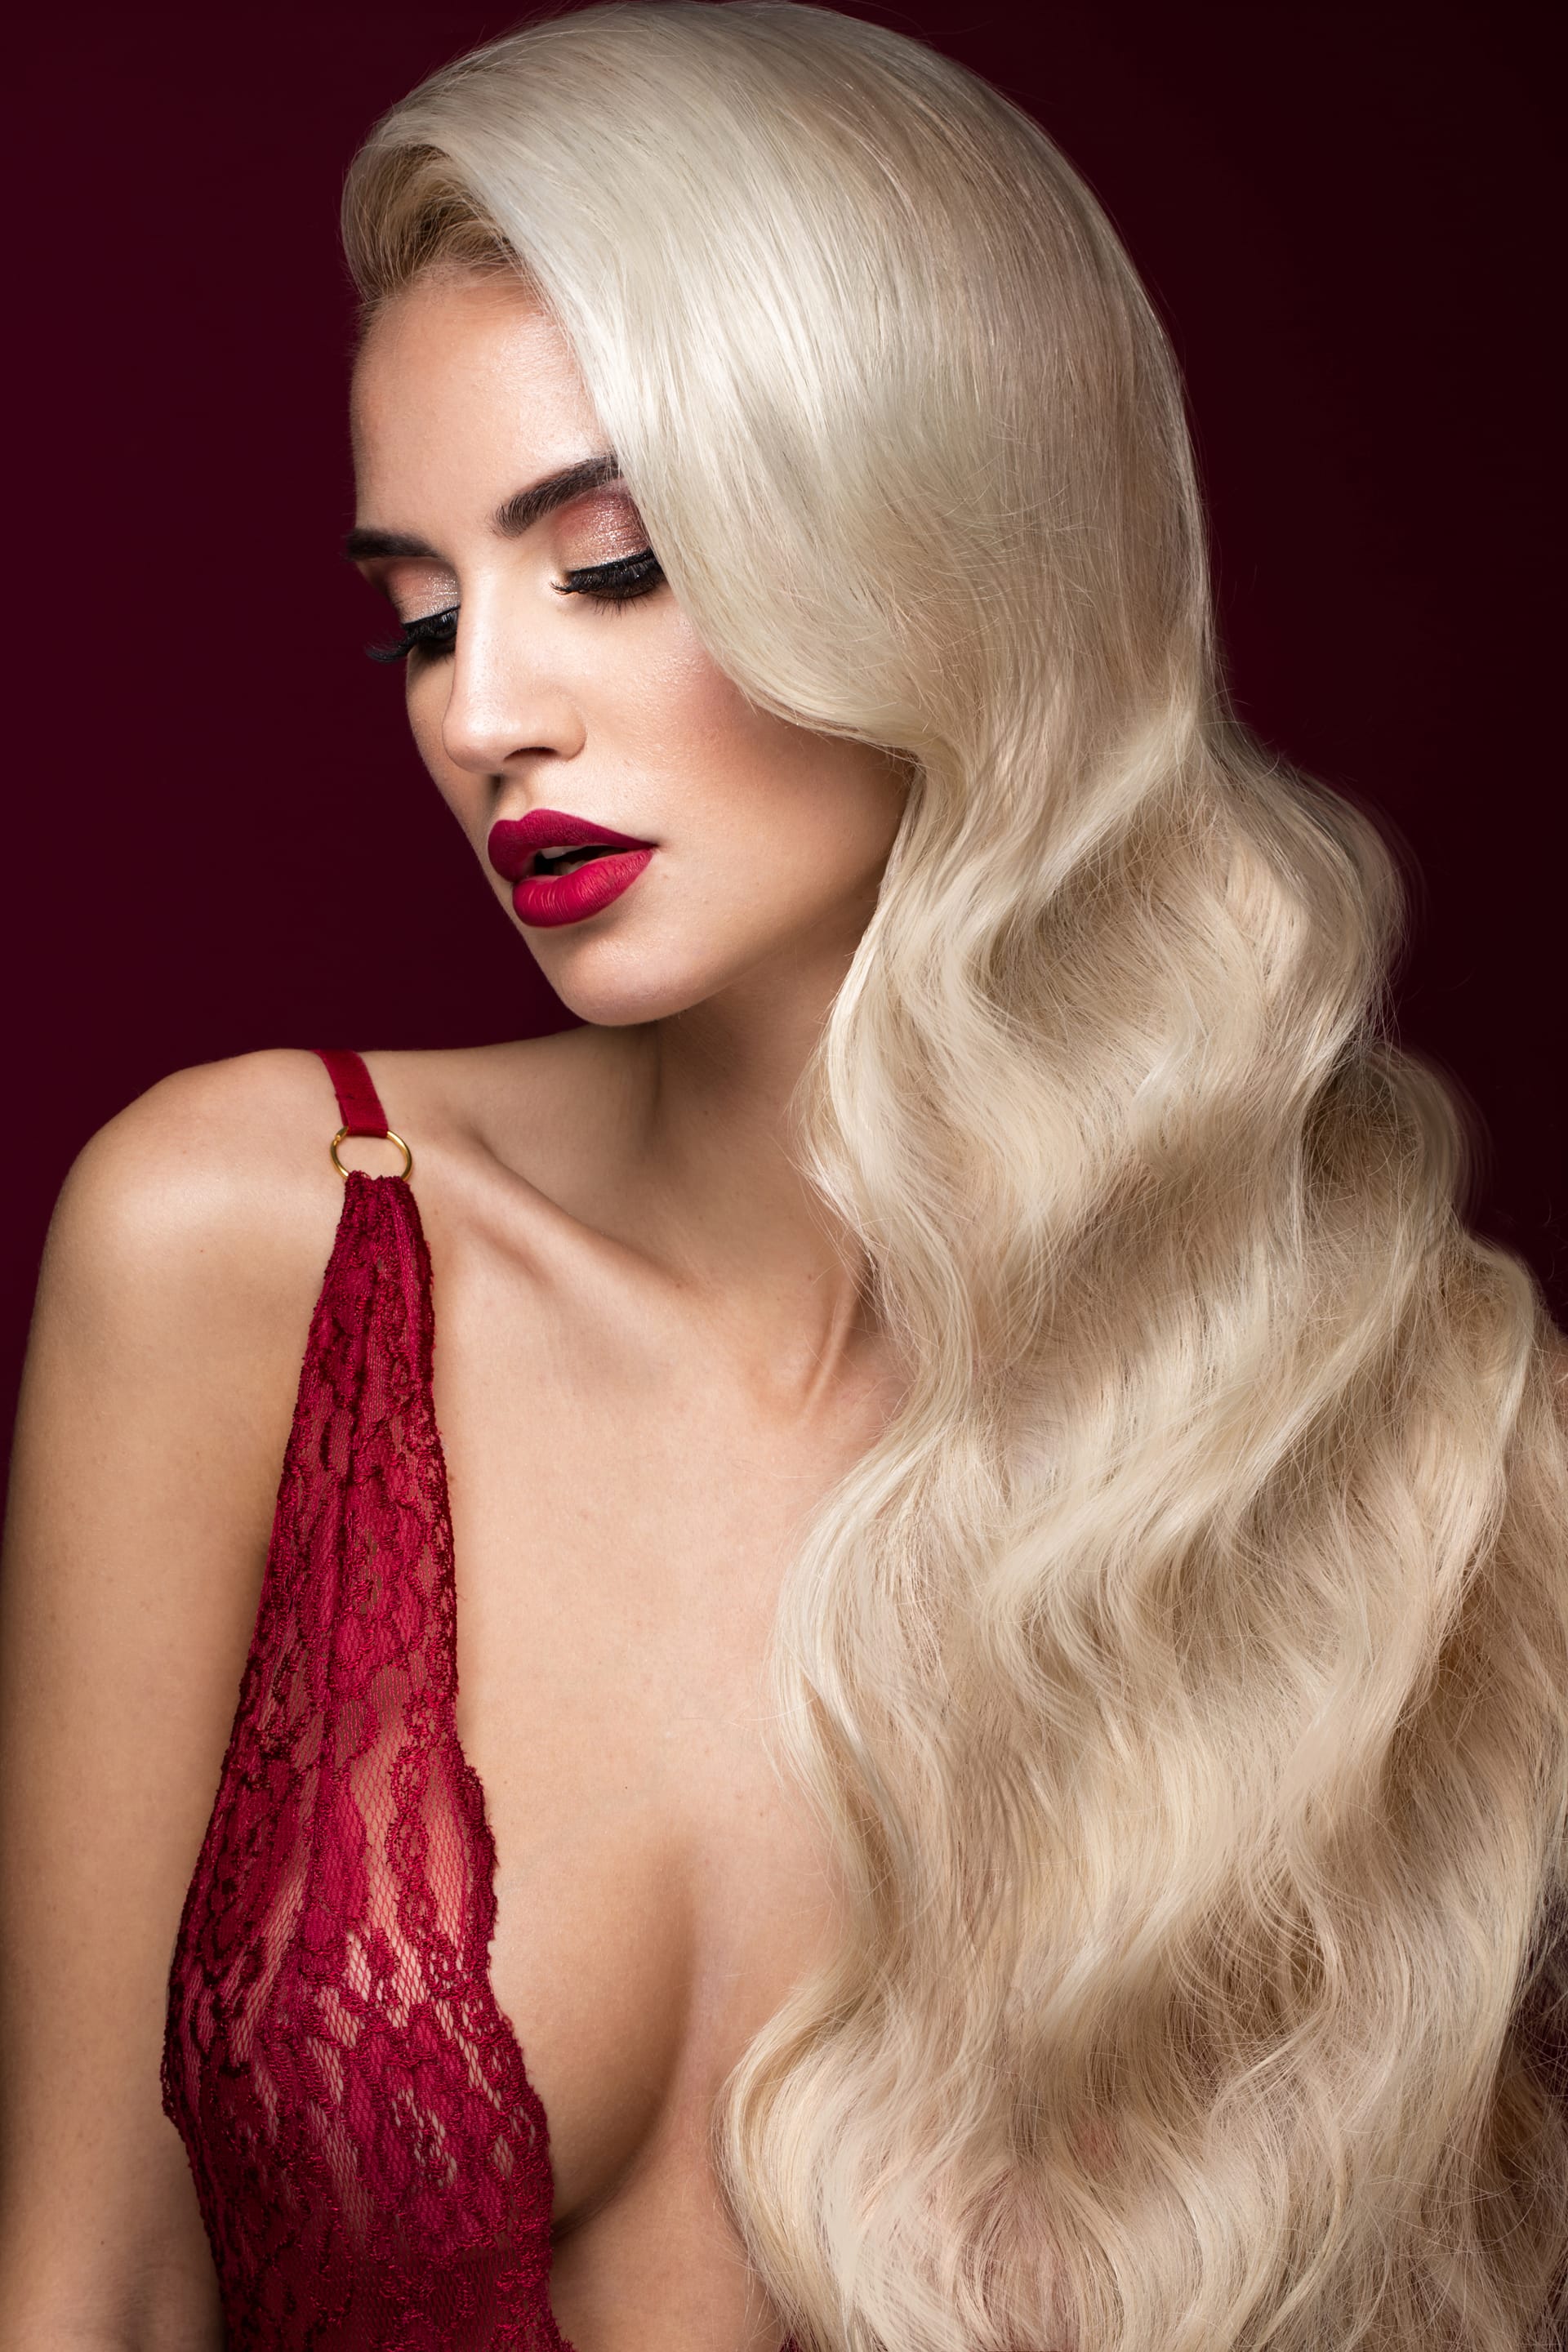 Hollywood manner with curls red lips lingerie beauty face hair